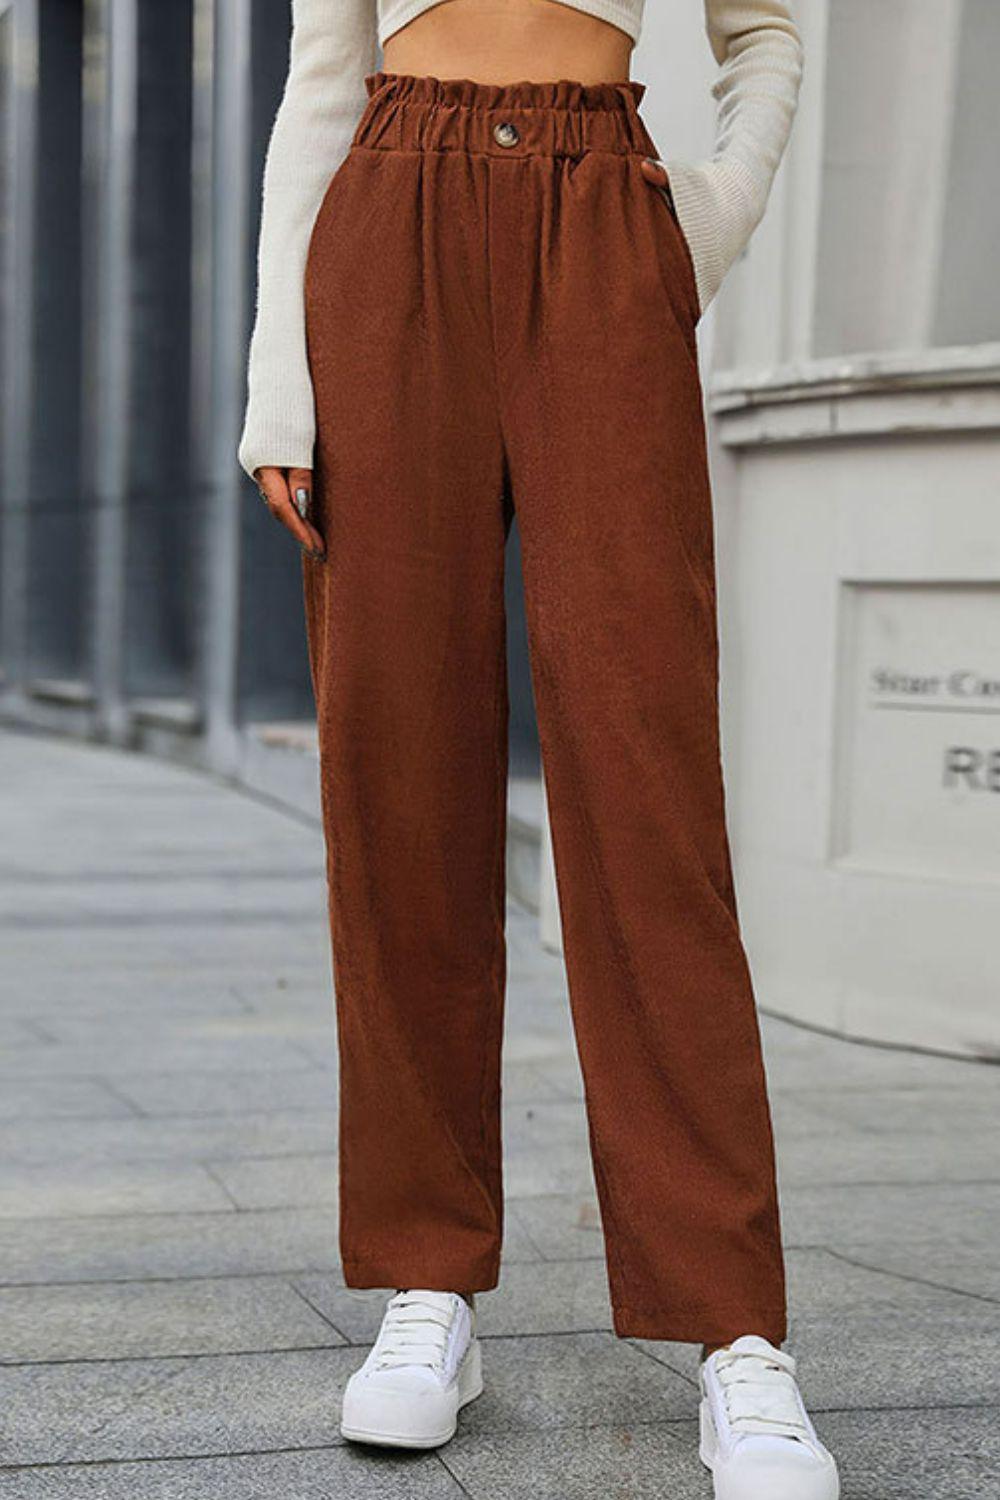 Paperbag Waist Straight Leg Pants with Pockets - LaLa D&C